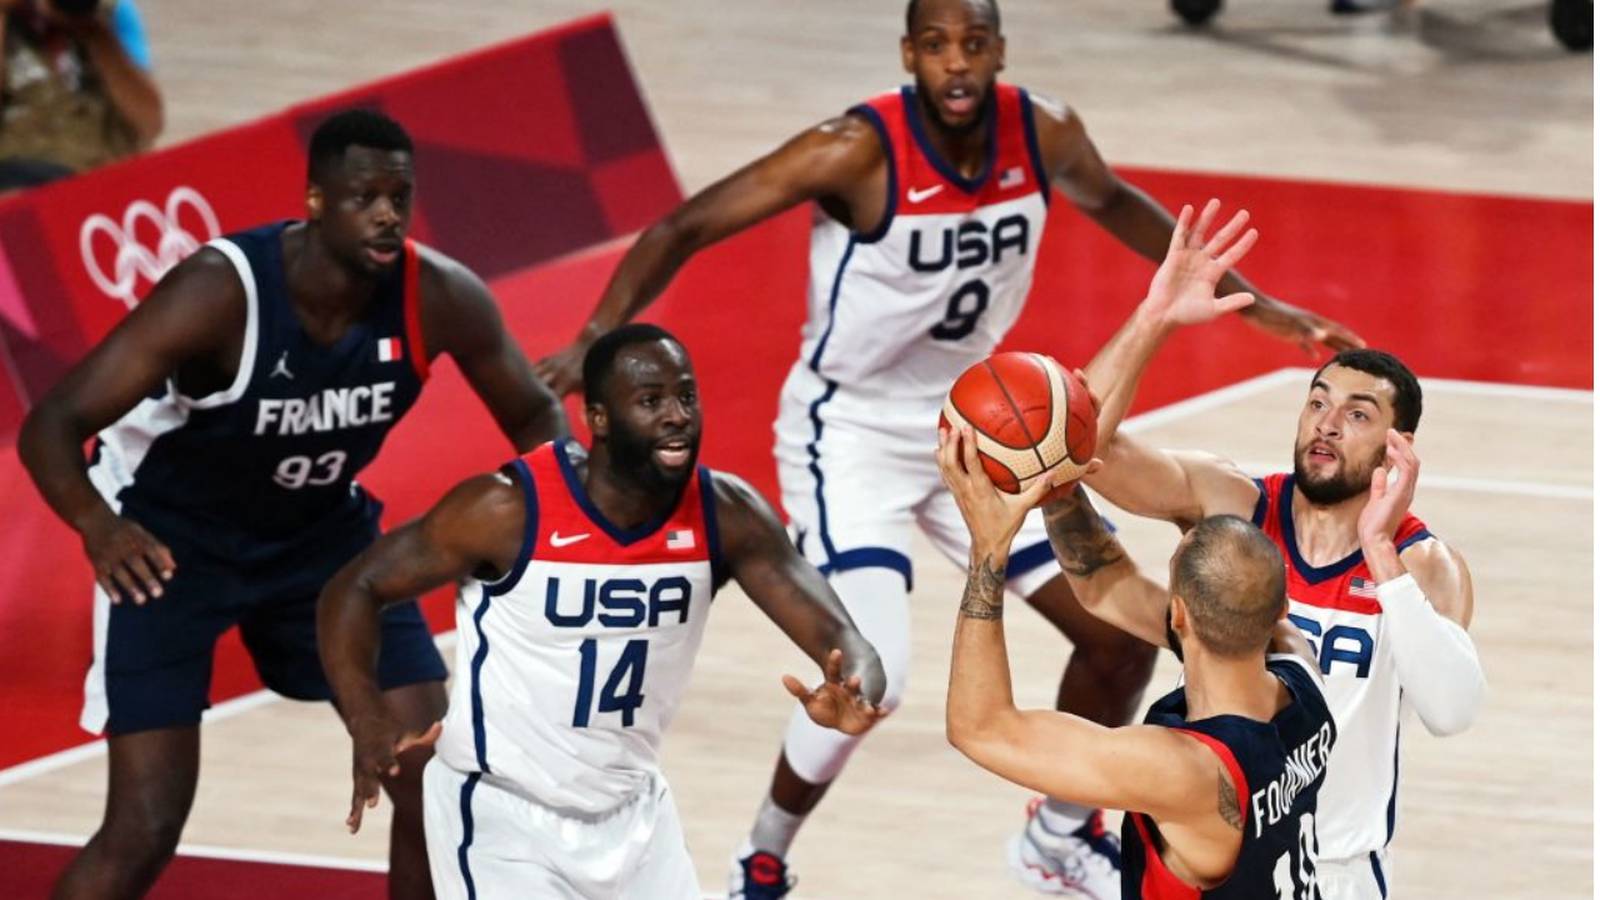 Photos US men's Olympic basketball team wins gold medal game WSBTV